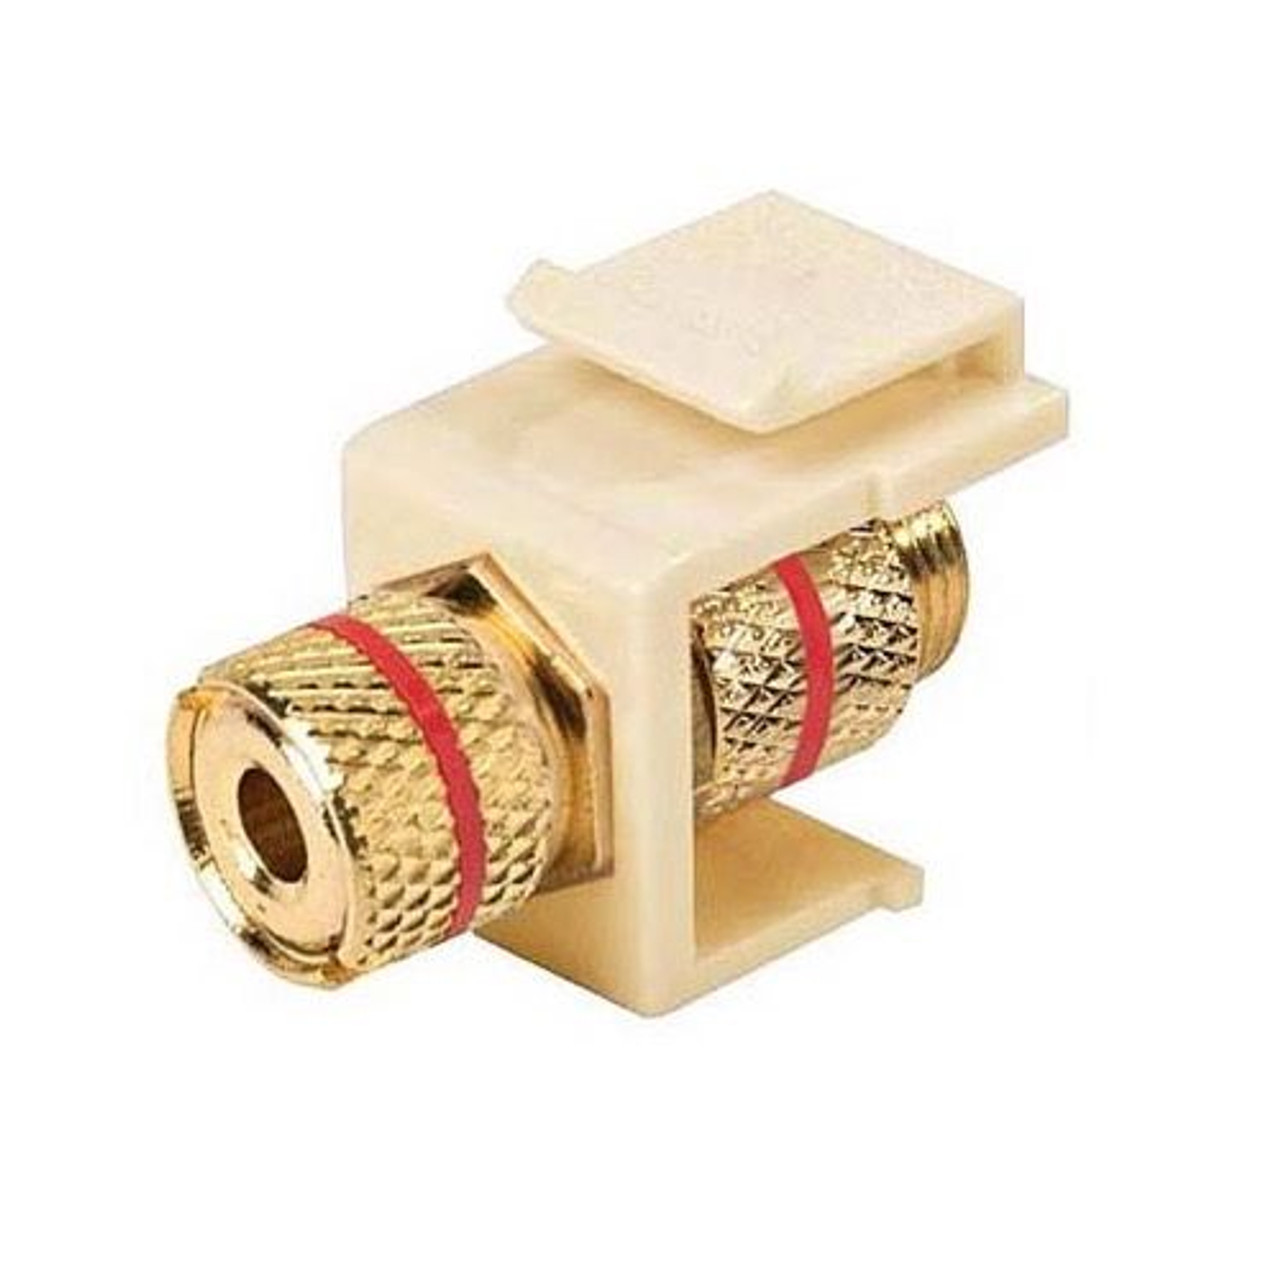 Eagle Banana Speaker Binding Post Keystone Jack Insert Ivory 5-Way Female Red Band Banana Jack Connector Gold QuickPort Signal Component Snap-In Wall Plate Module